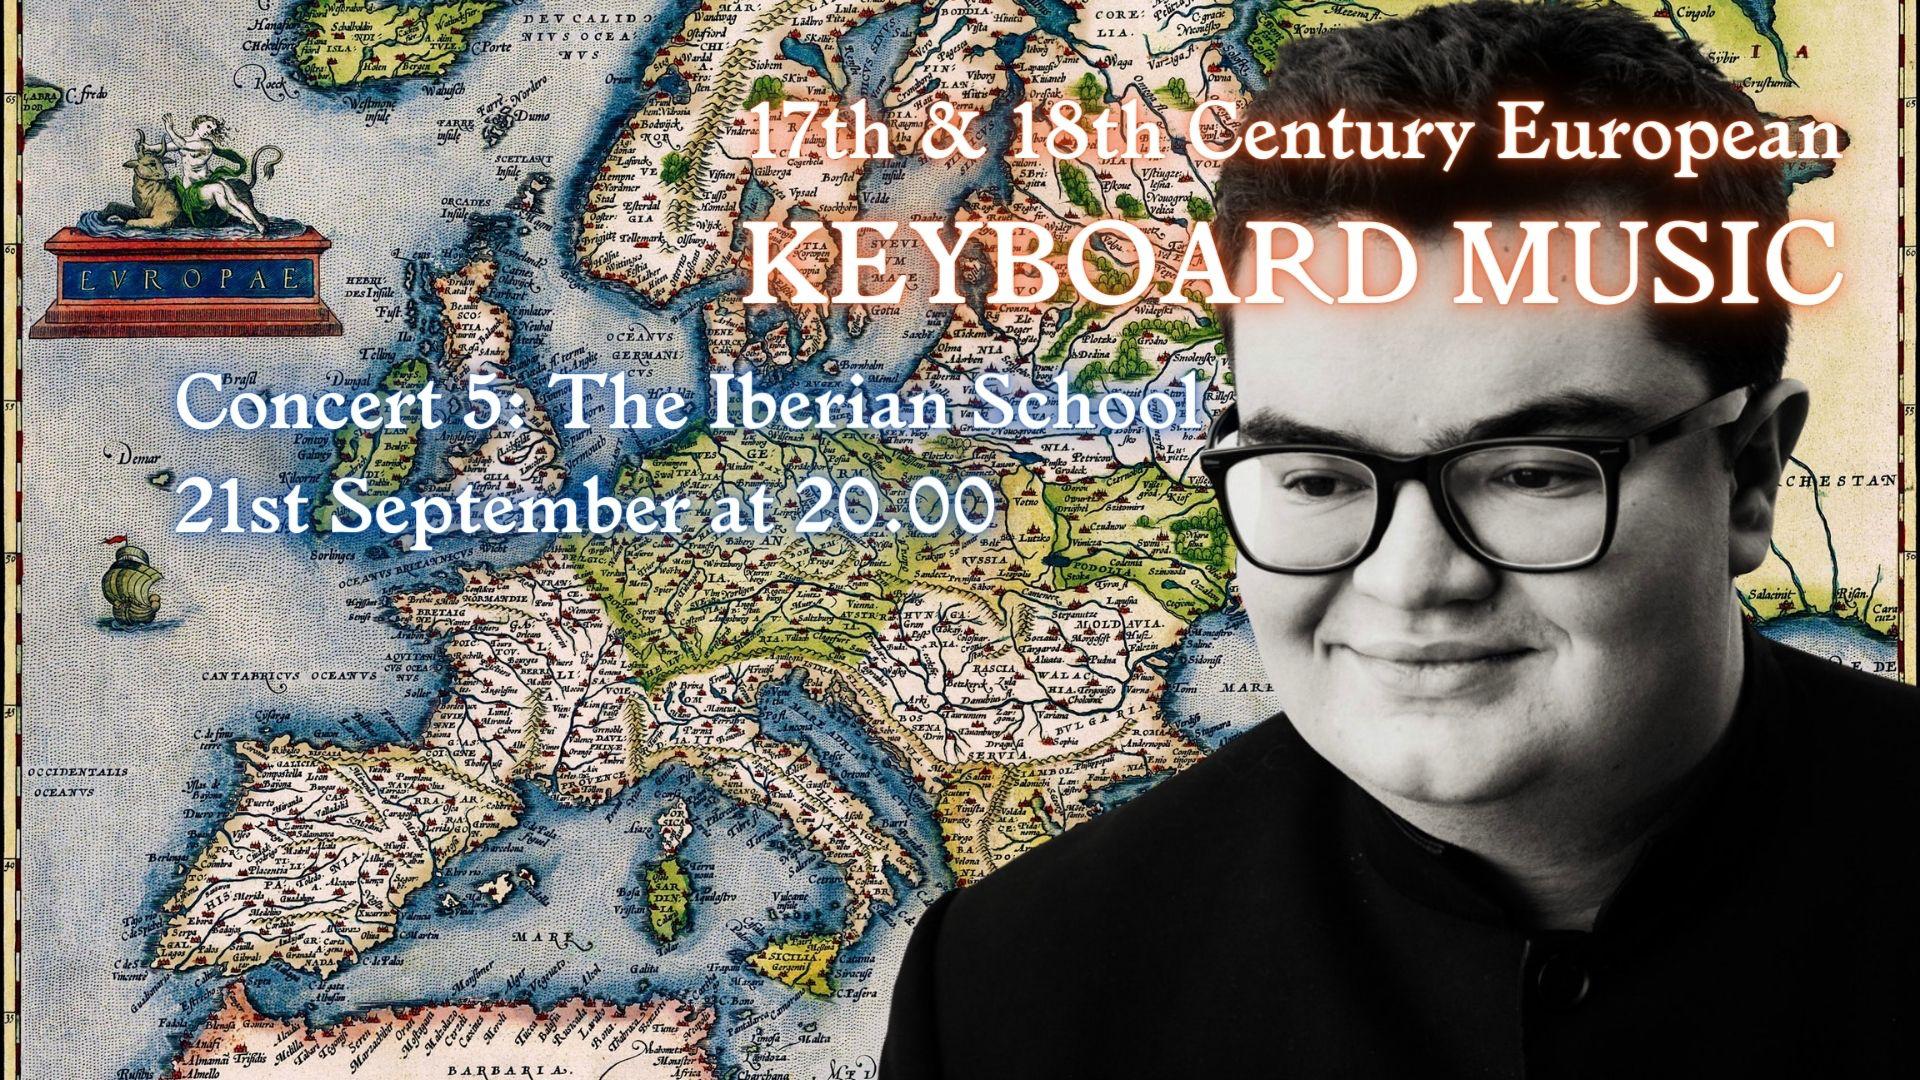 17th & 18th century European keyboard music: Concert No.5 ~ Live Broadcast